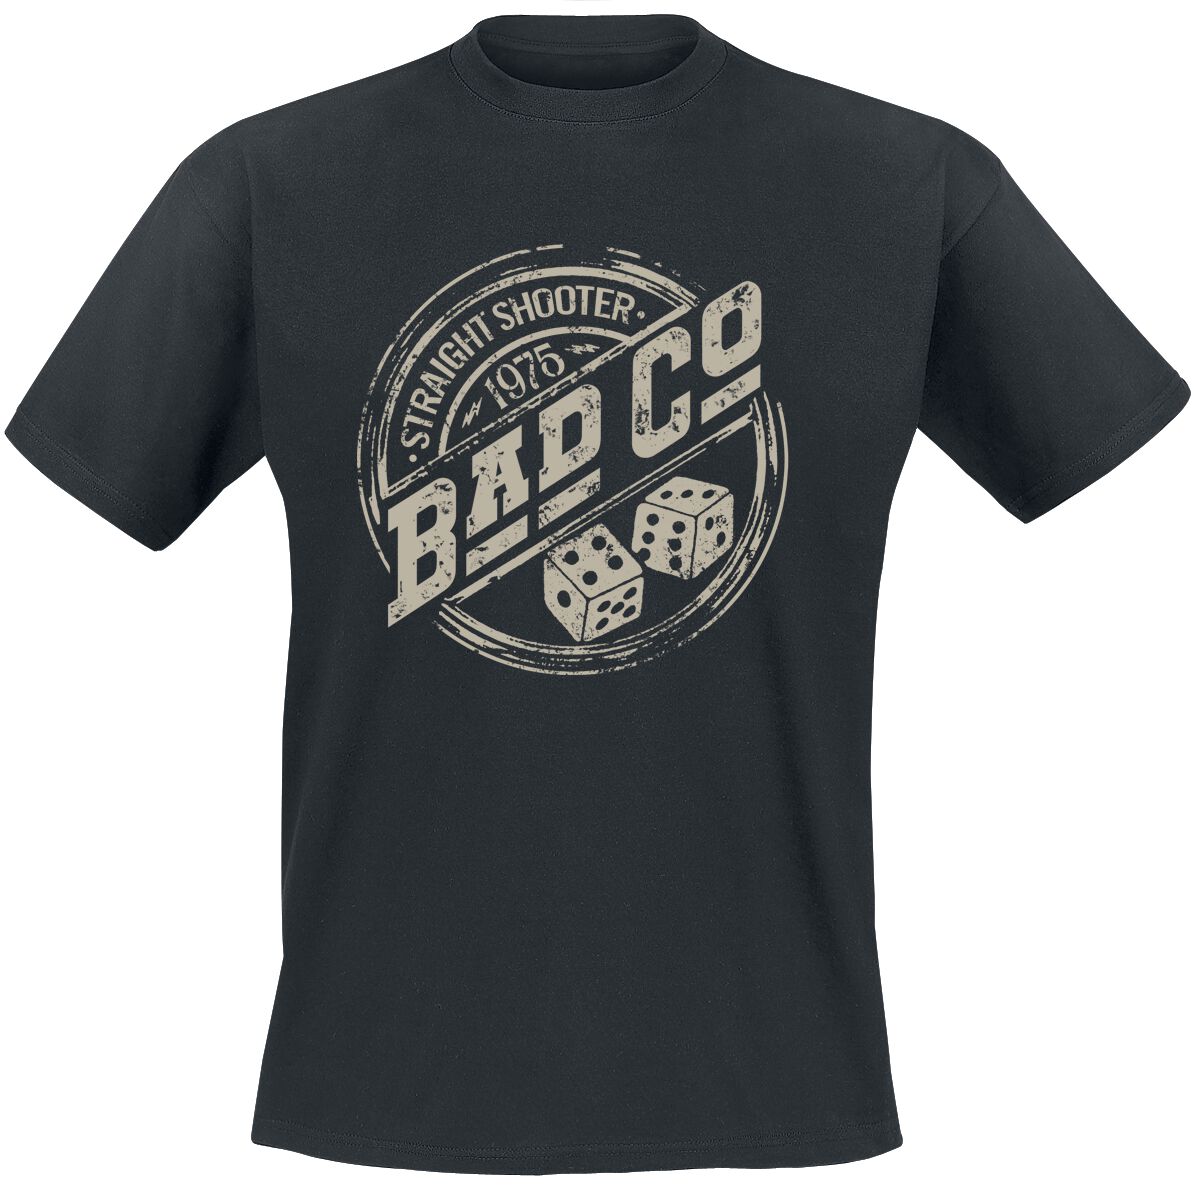 Bad Company Straight Shooter T-Shirt schwarz in S